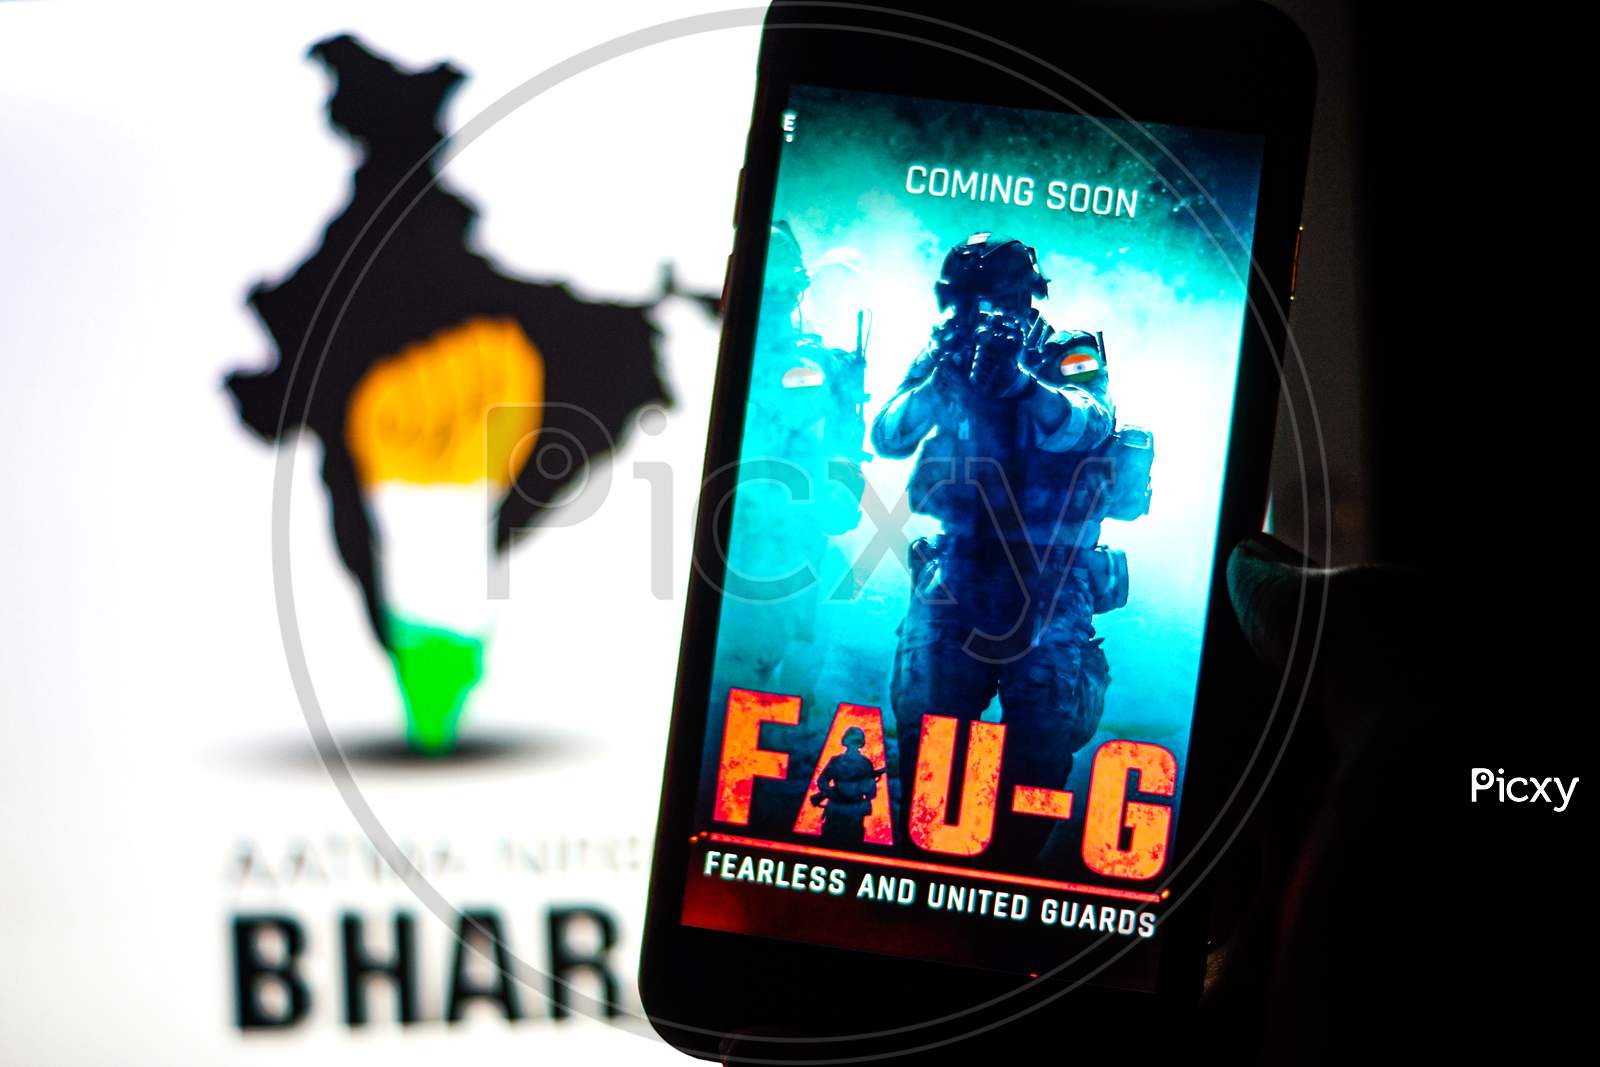 FAUG Game on Mobilephone or Smartphone Screen with Indian Map in the Background